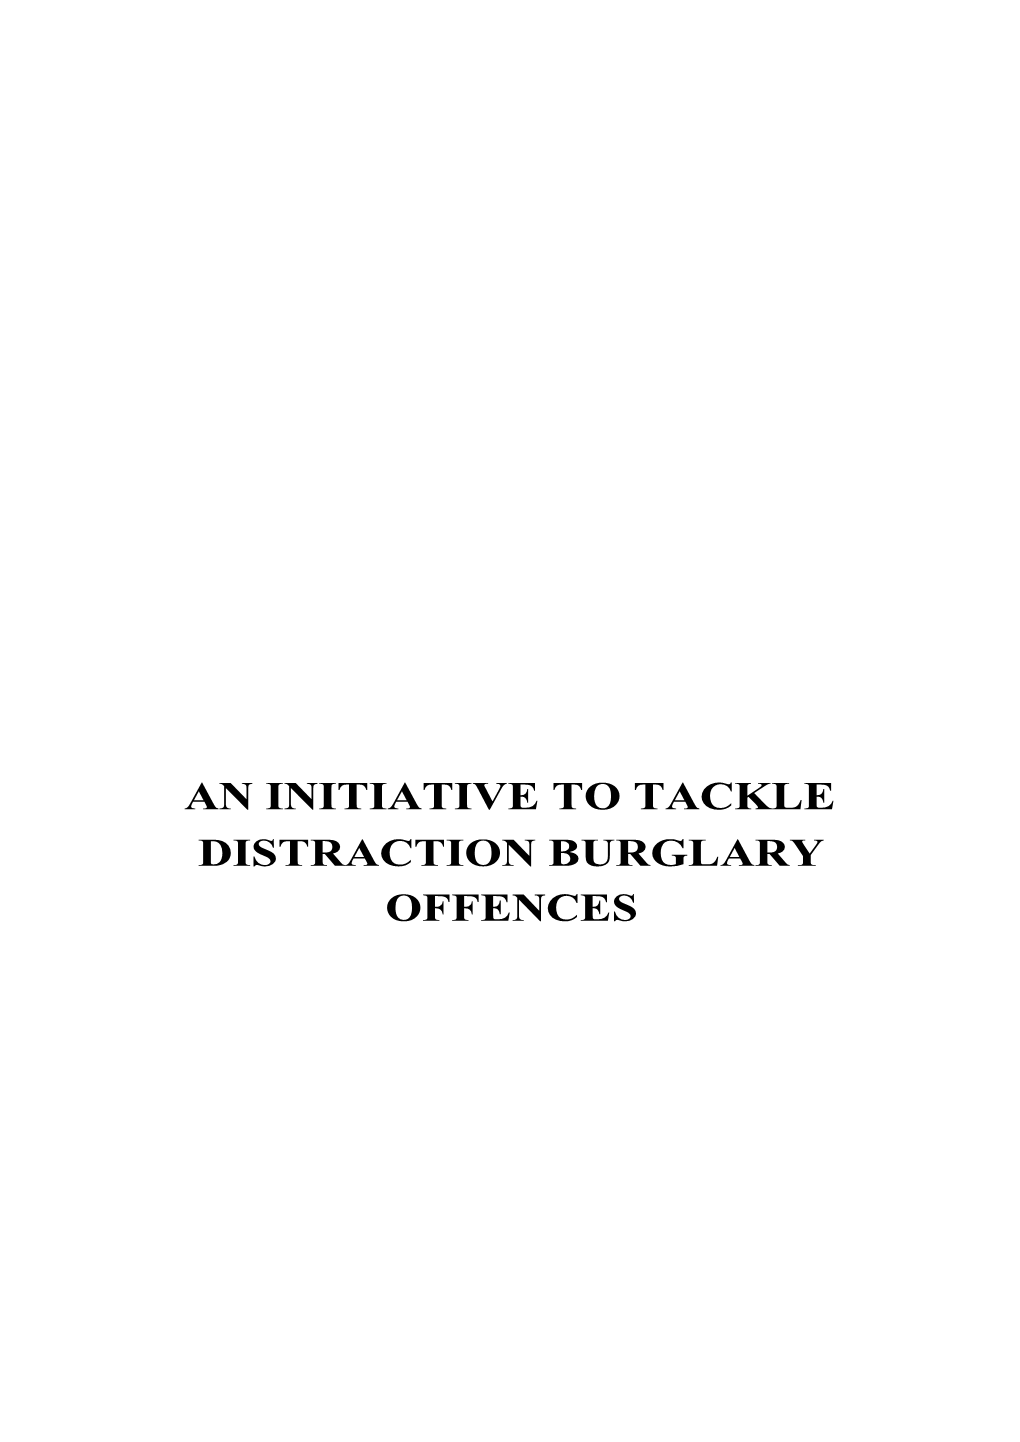 AN INITIATIVE to TACKLE DISTRACTION BURGLARY OFFENCES Derbyshfre Constabulary We Care R — Telephone {01773) 570100